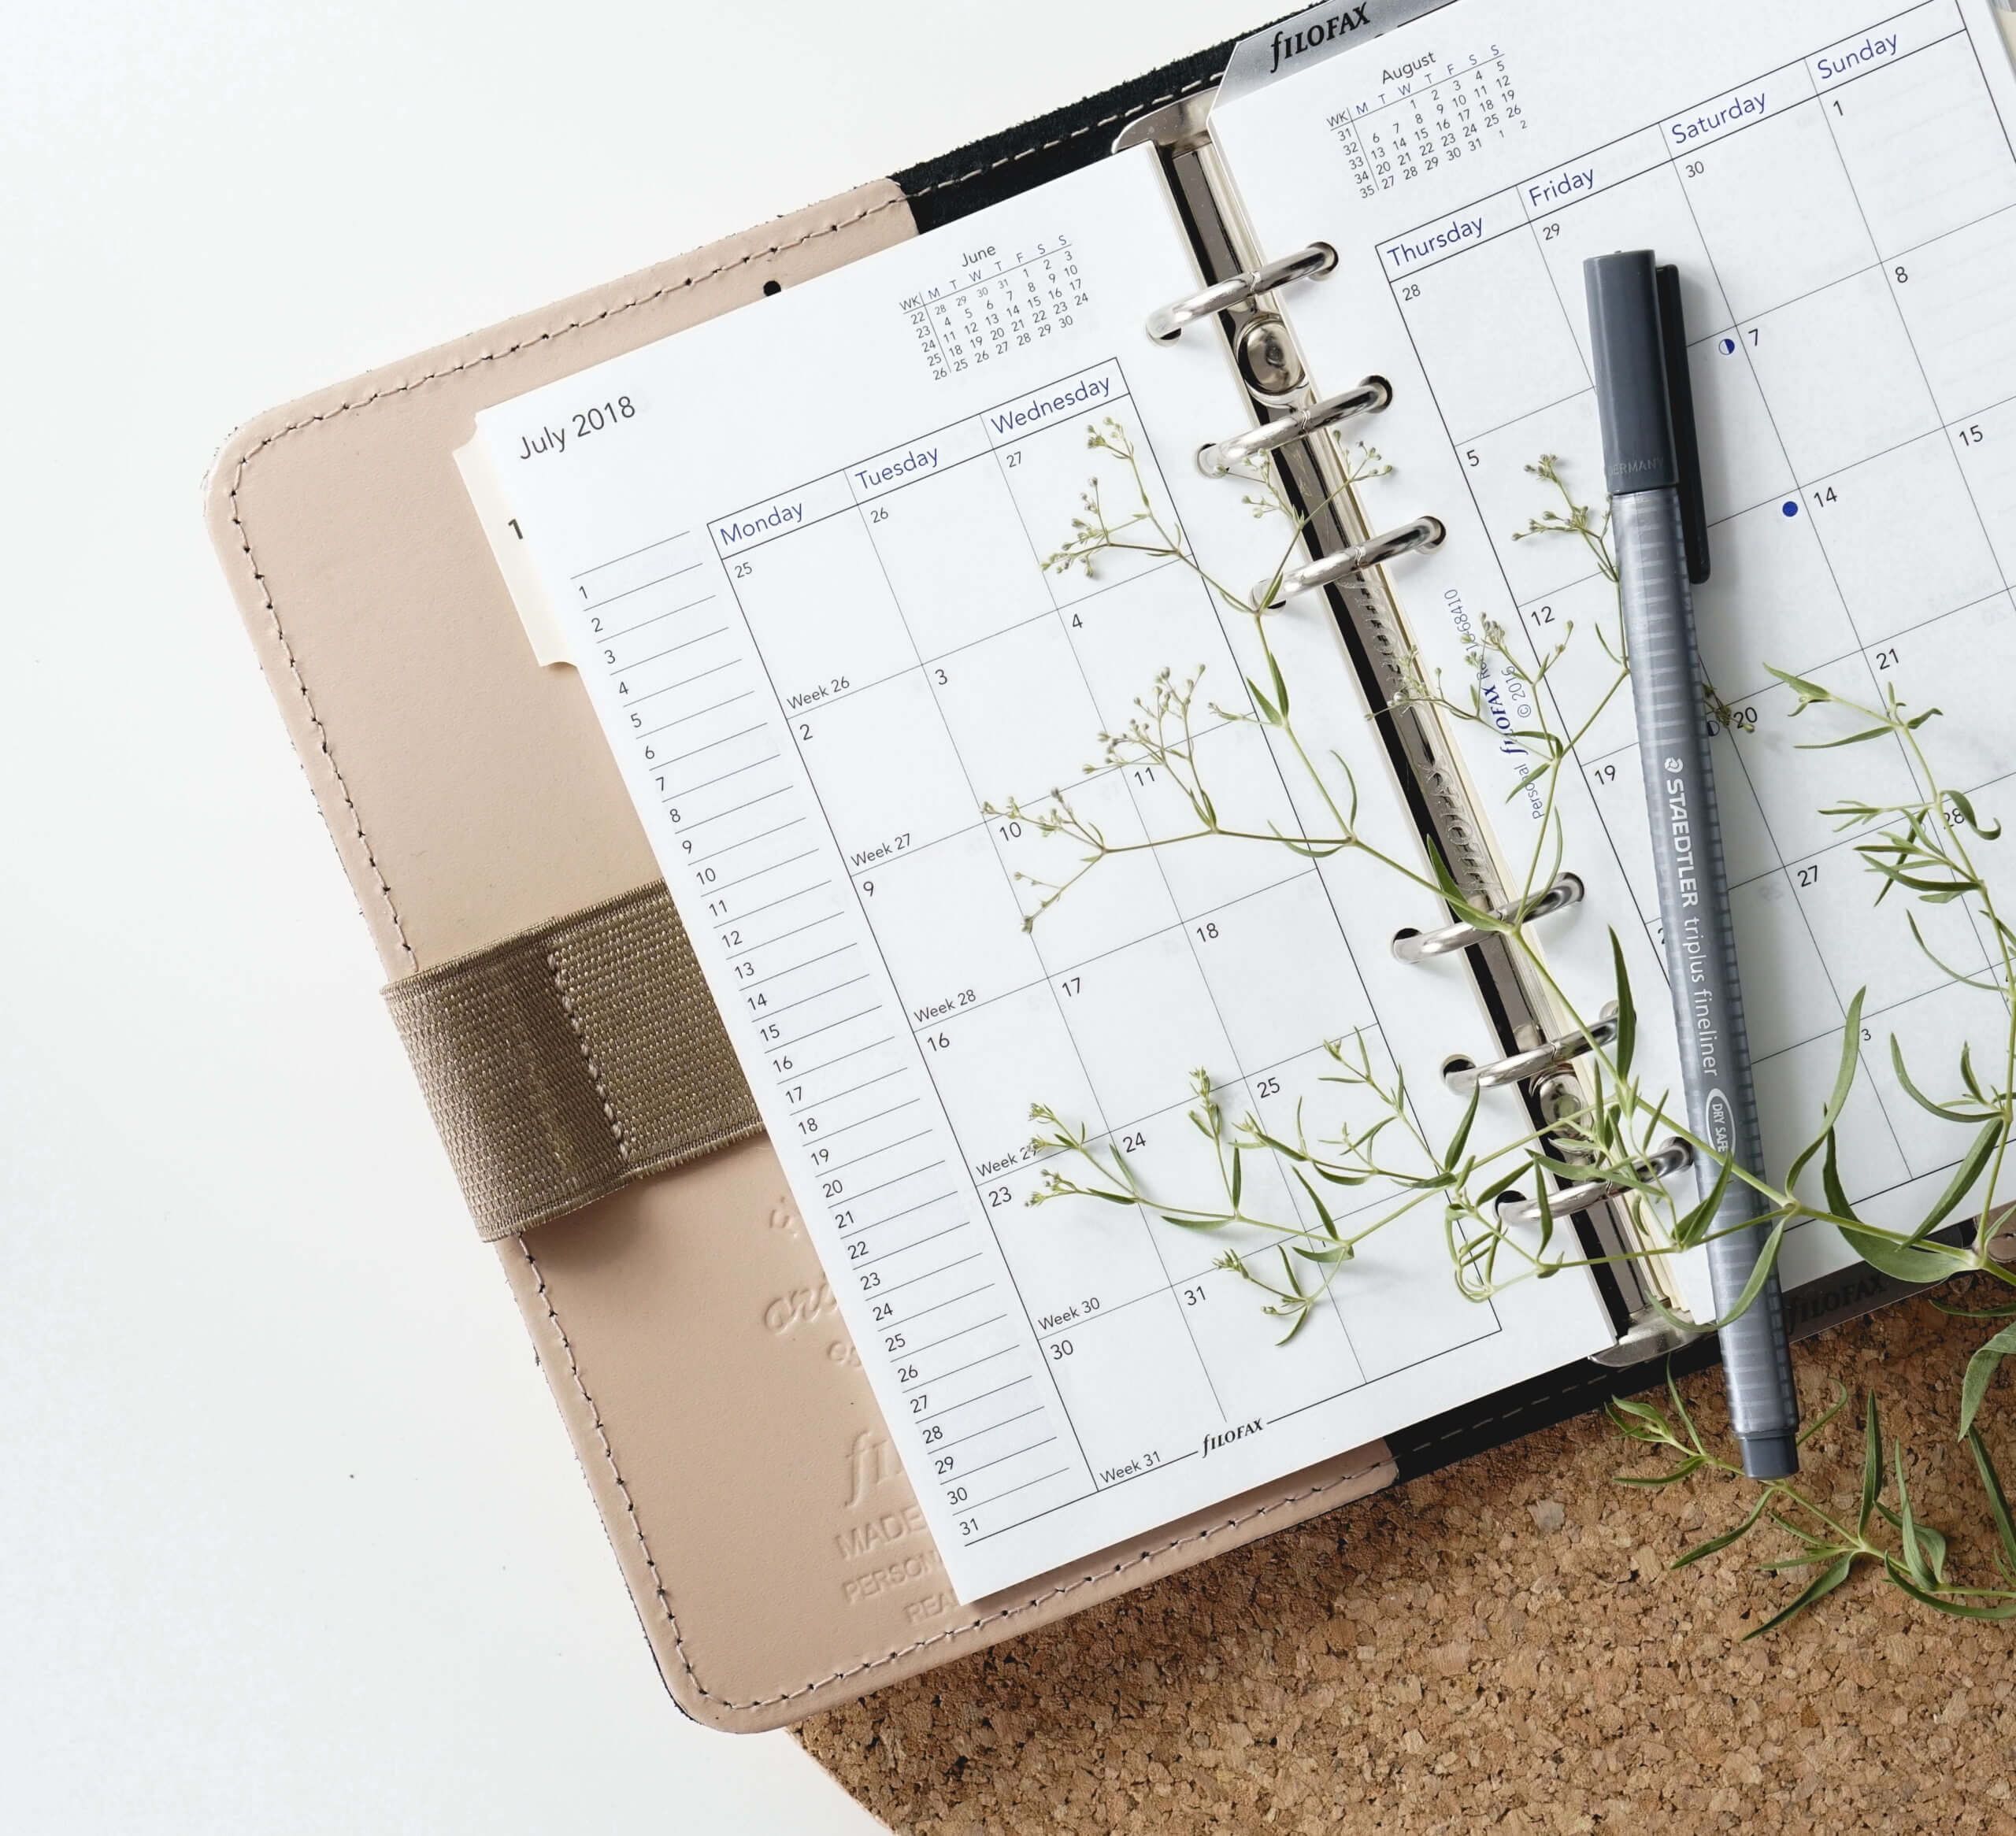 A planner with a calendar opened to July 2018 with a pen a sprig of leaves on it.